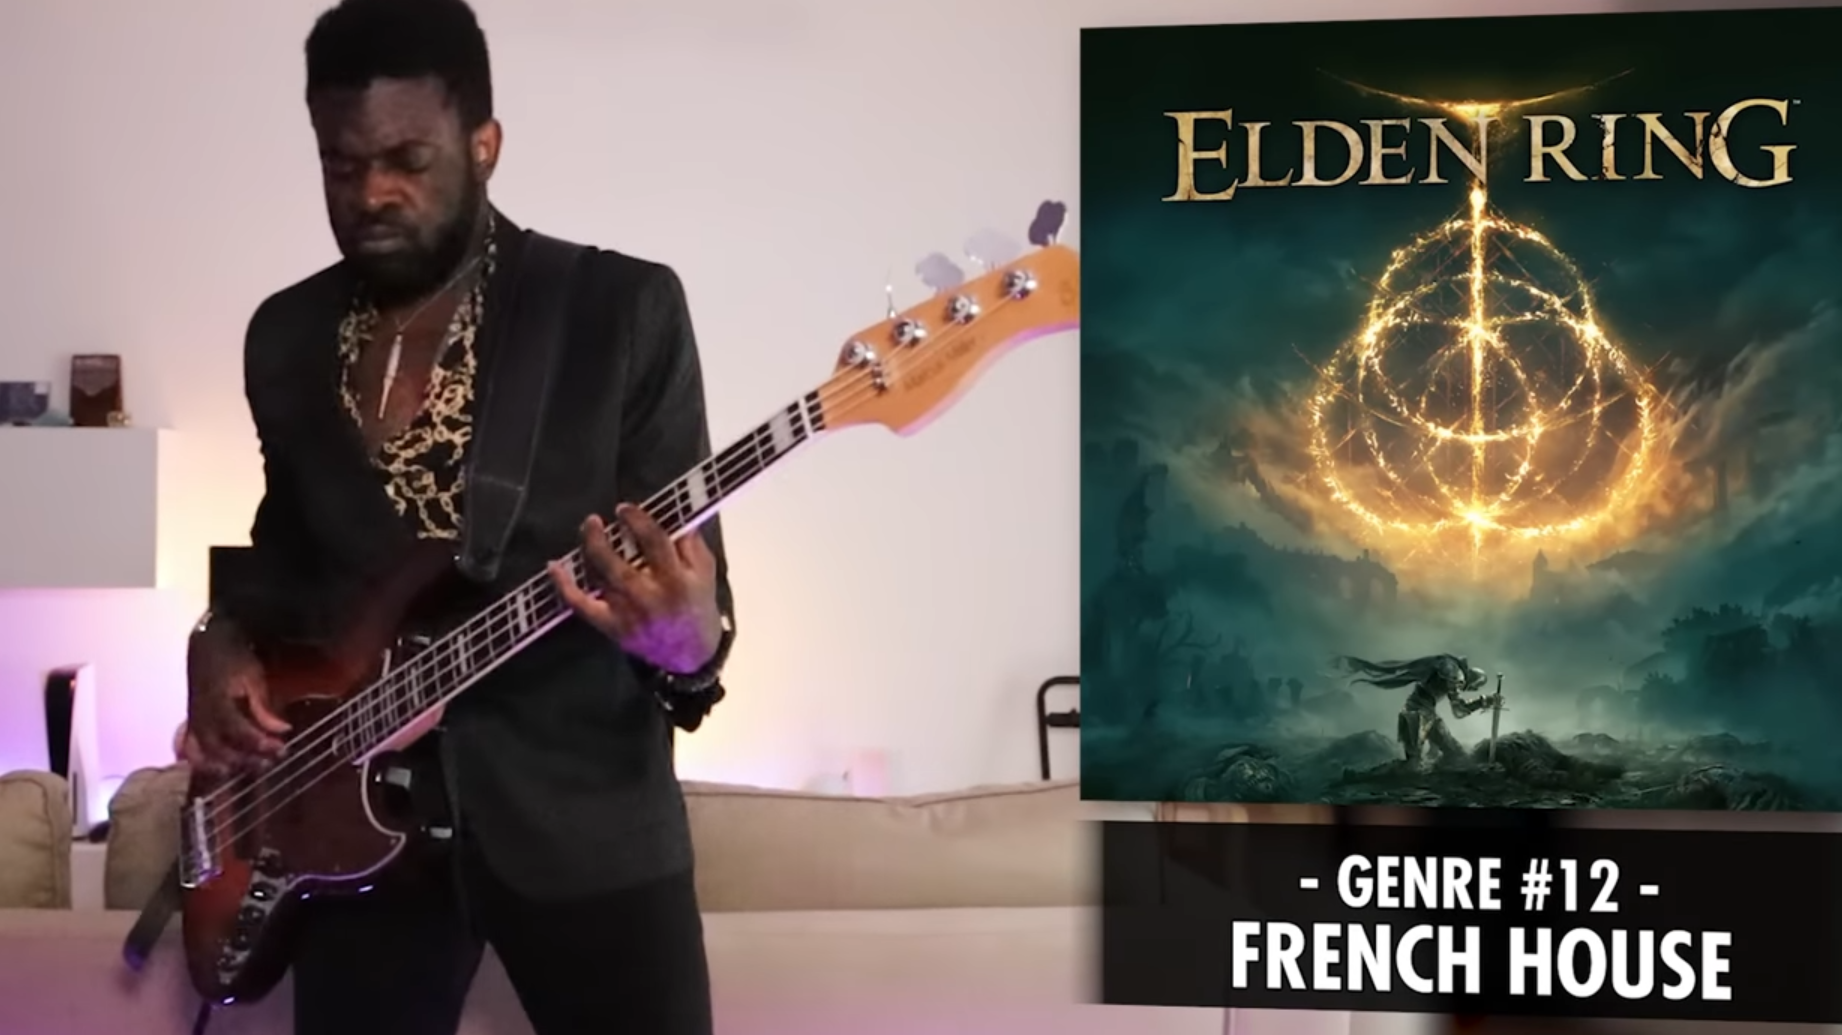 Rune-powered musician summons up 15 covers of Elden Ring‘s theme song